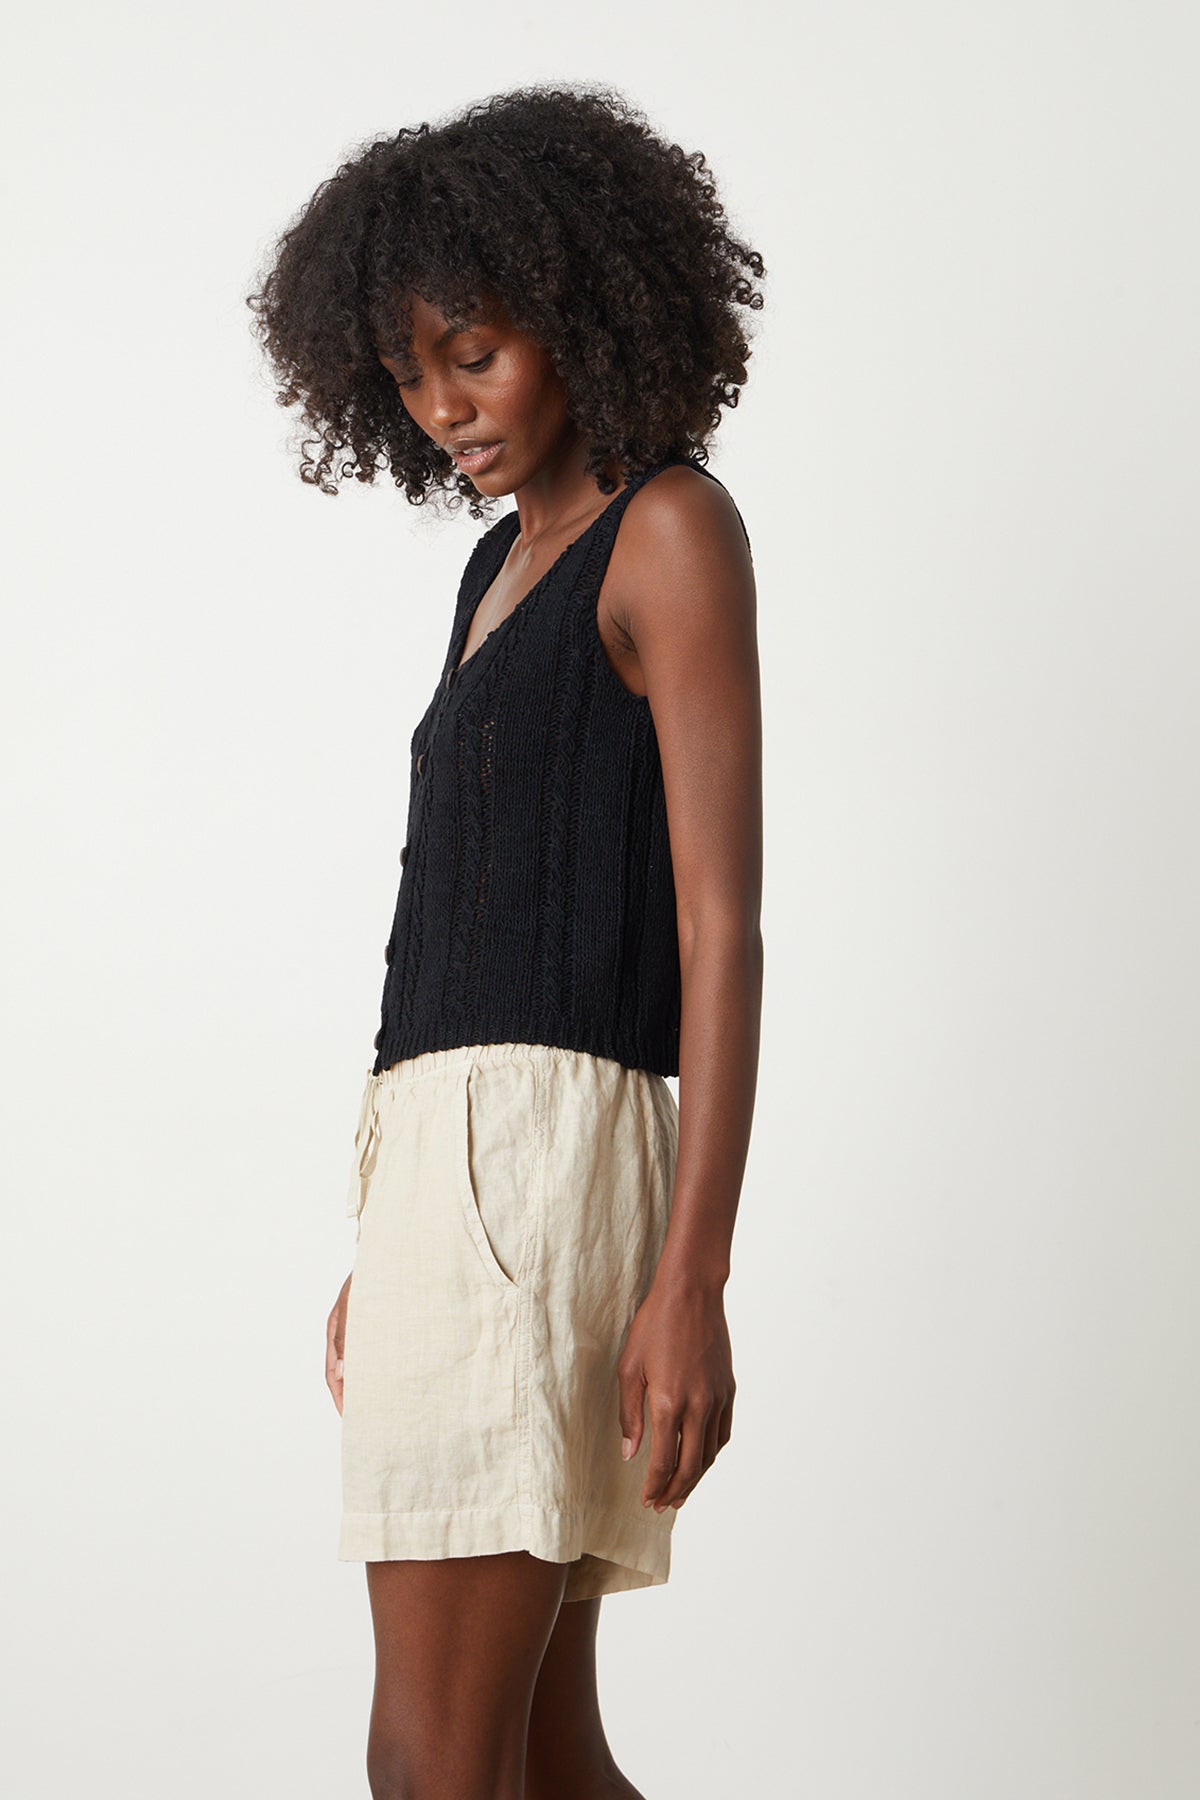 Layla Crochet Stitch Tank Top in black with Tammy short in sand side-26305204420801